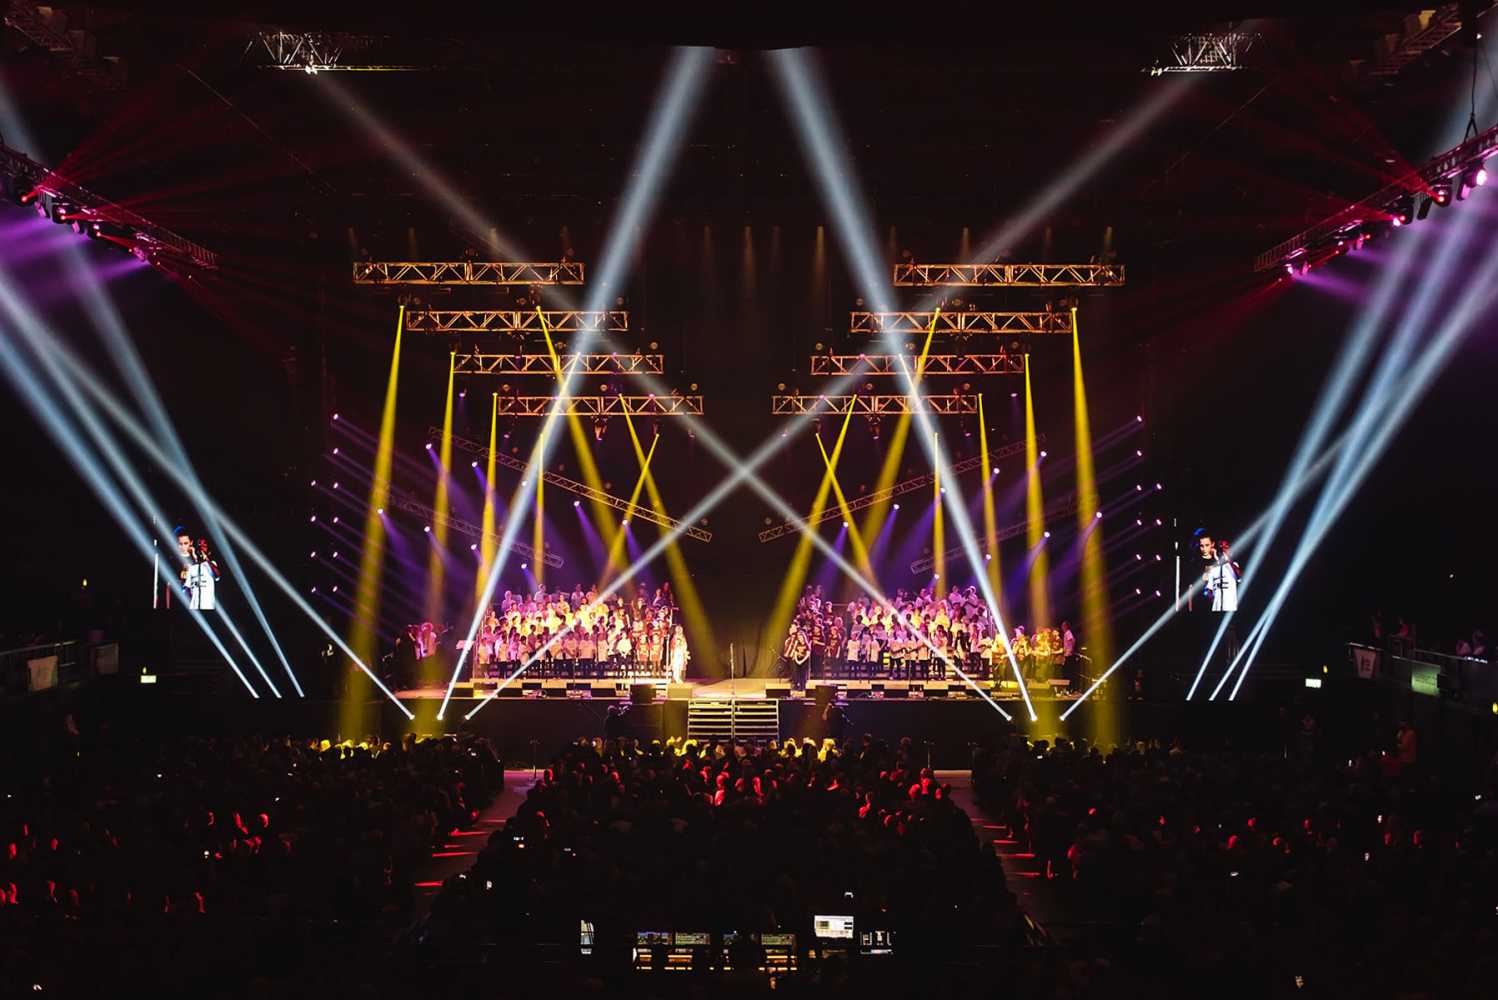 The Voice in a Million extravaganza was staged at London’s SSE Wembley Arena (photo: Dawn Tolmie – PhotoKandi)